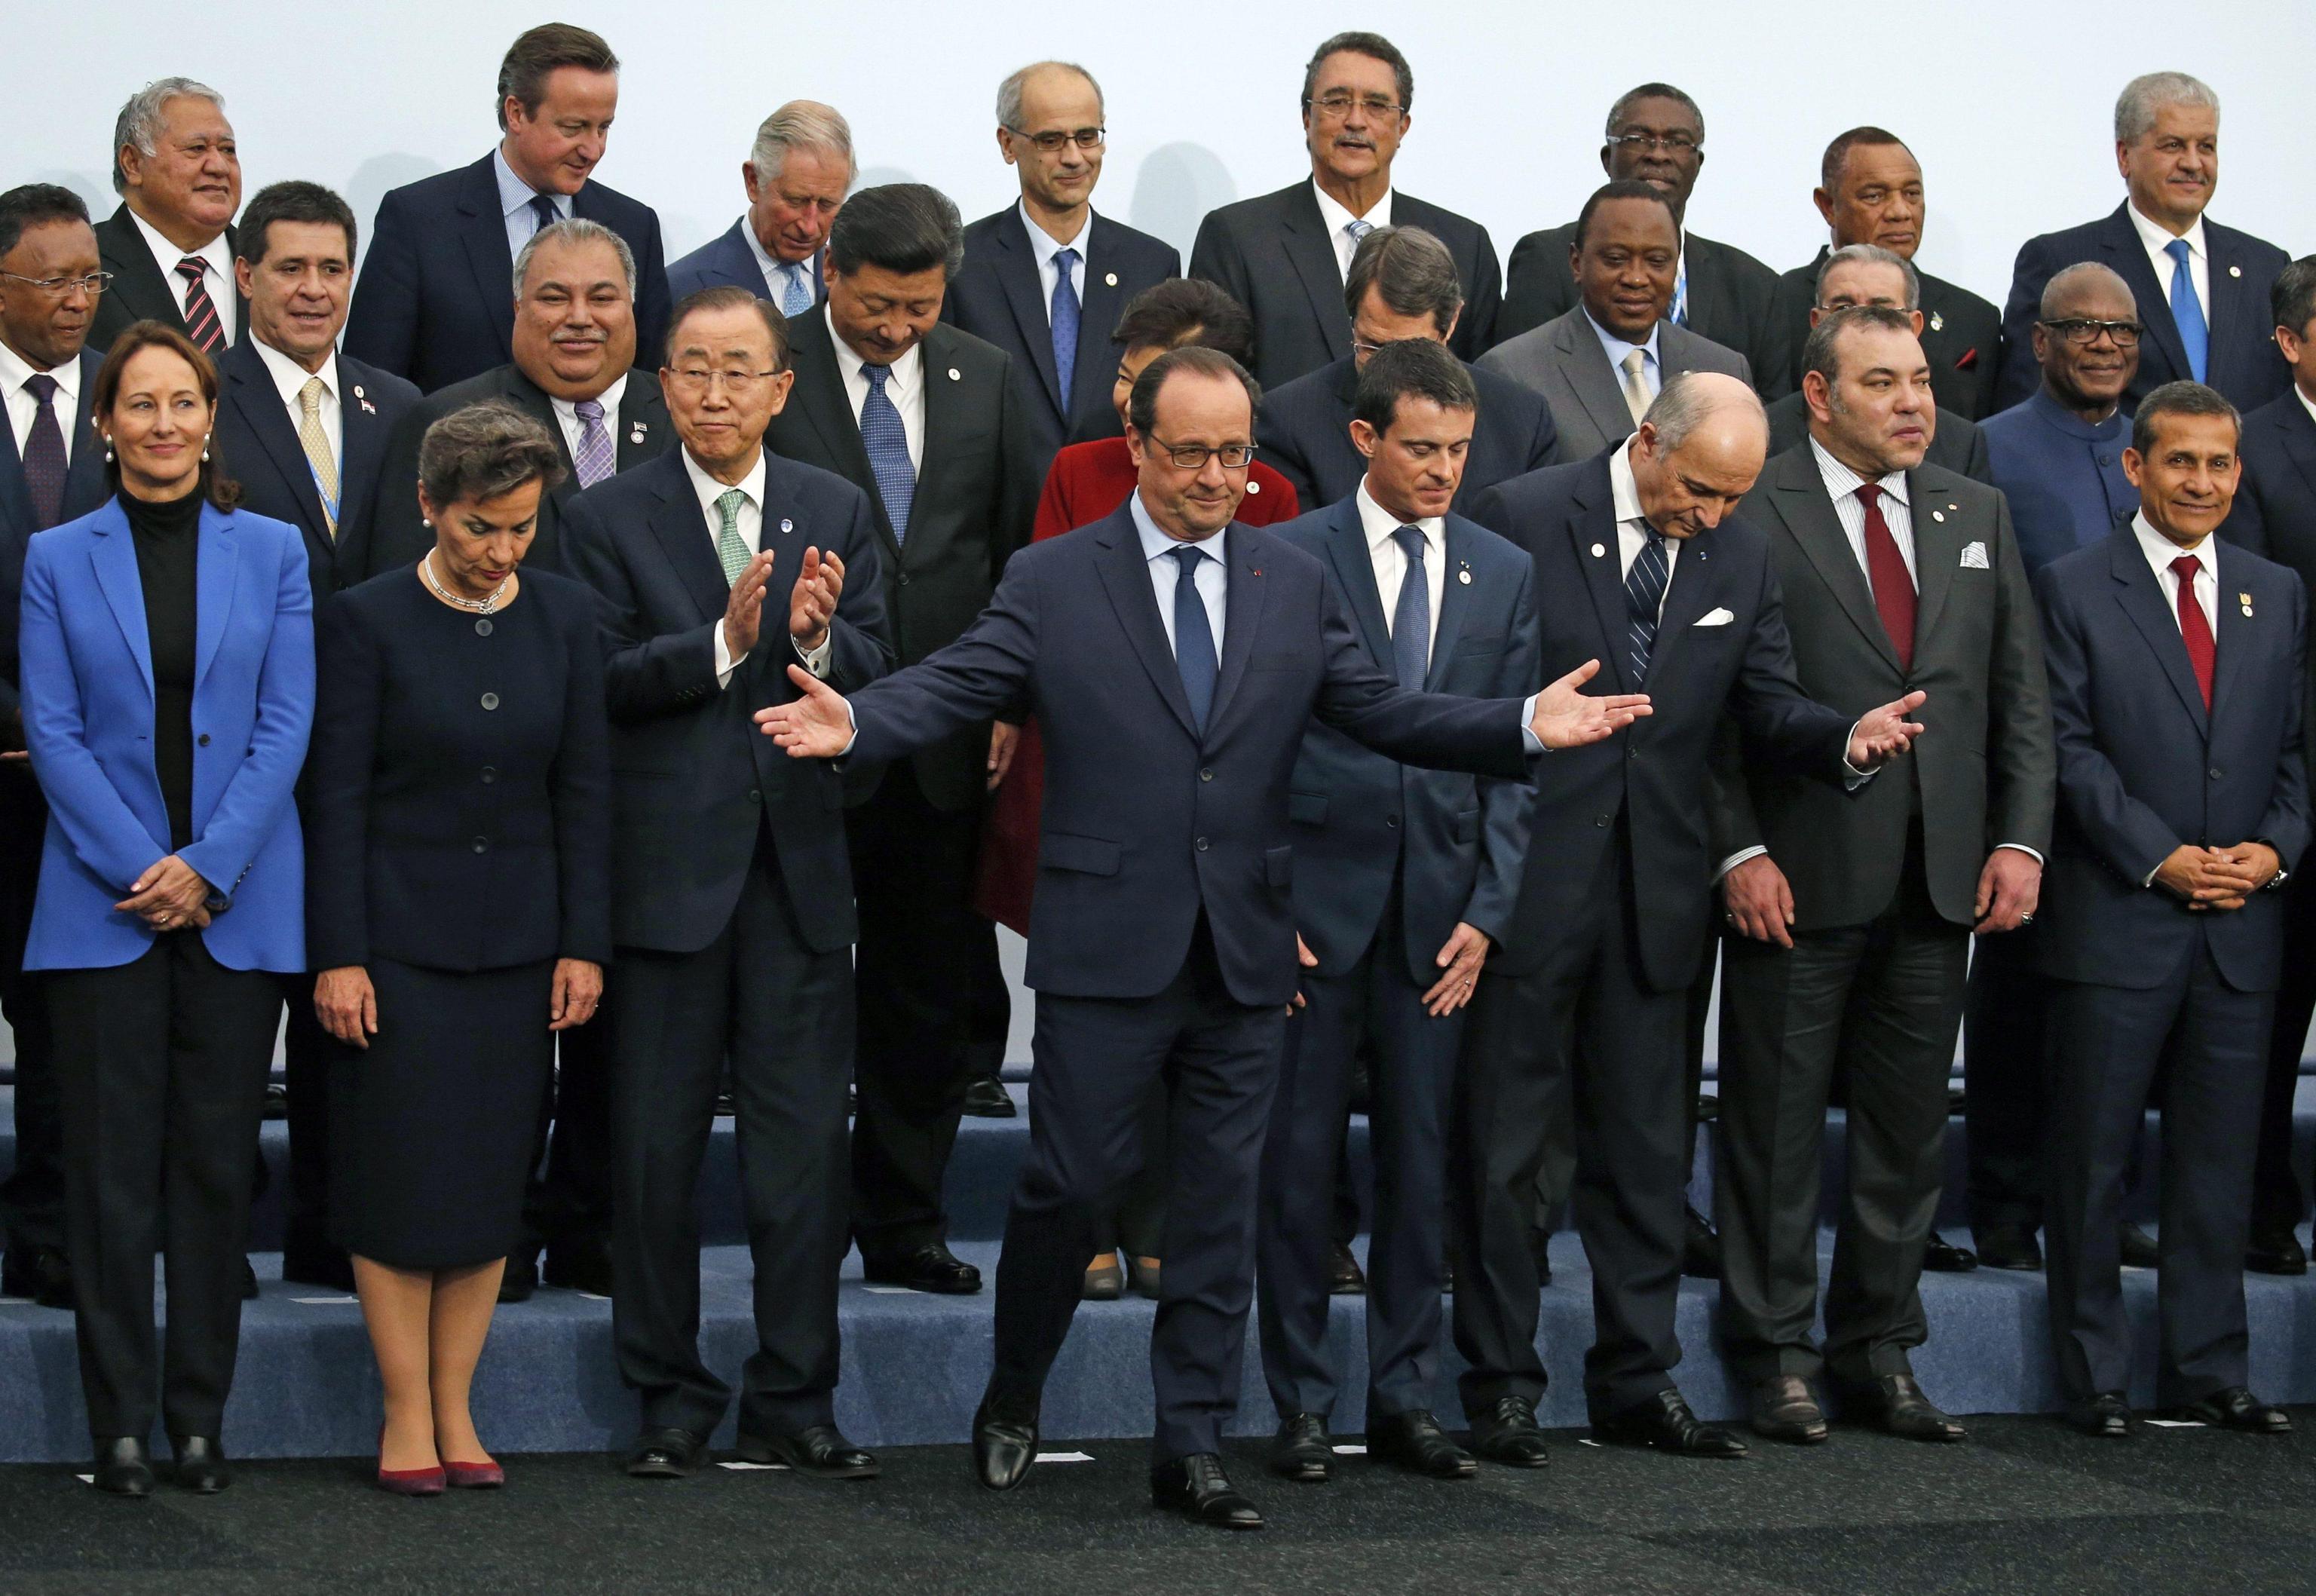 French President Francois Hollande gestures when posing with world leaders for a family photo at the COP21